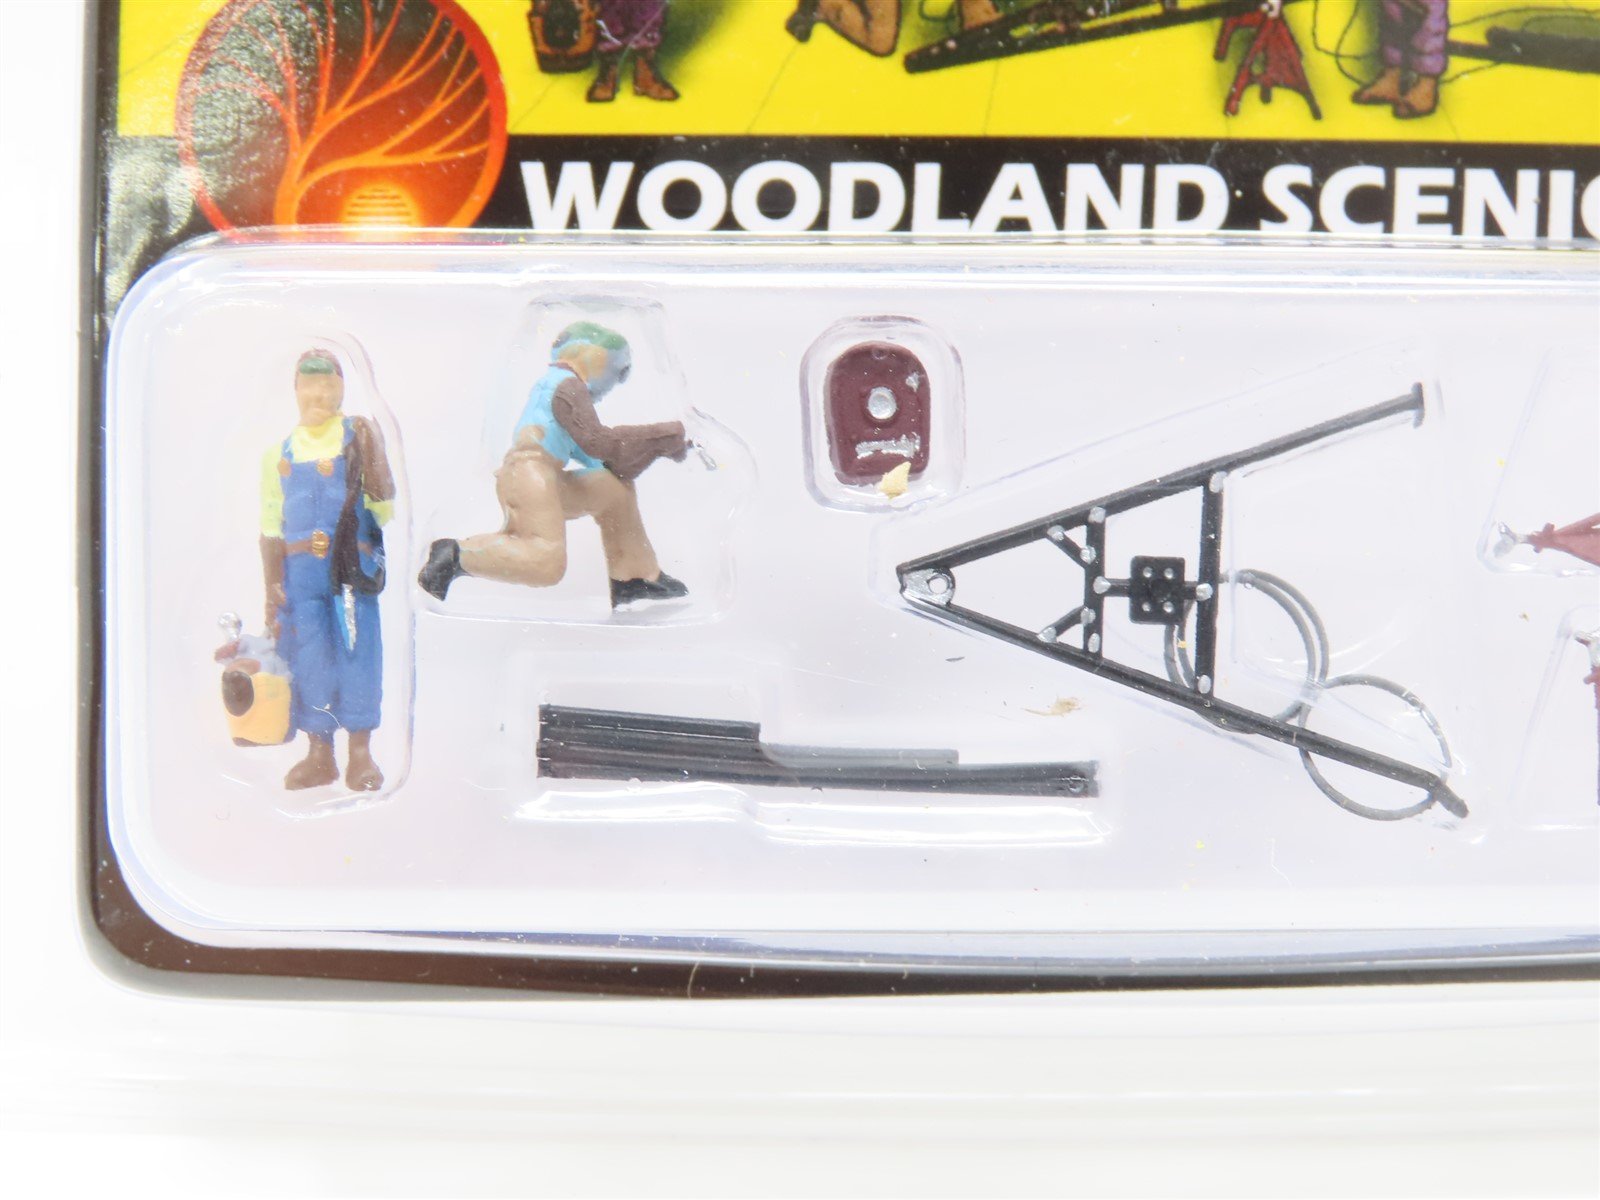 HO Scale Woodland Scenics A1871 Welders & Accessories Scenery